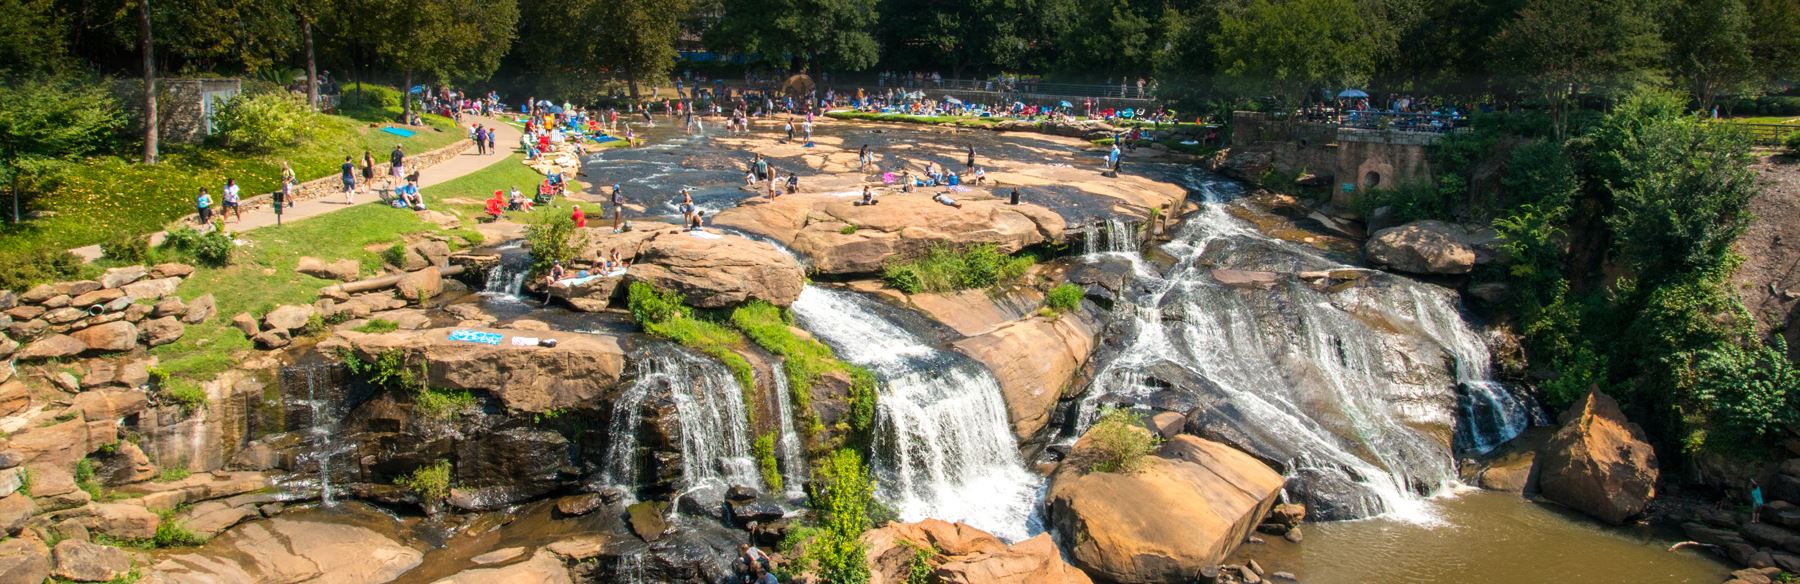 Best Places to Retire - Greenville, South Carolina